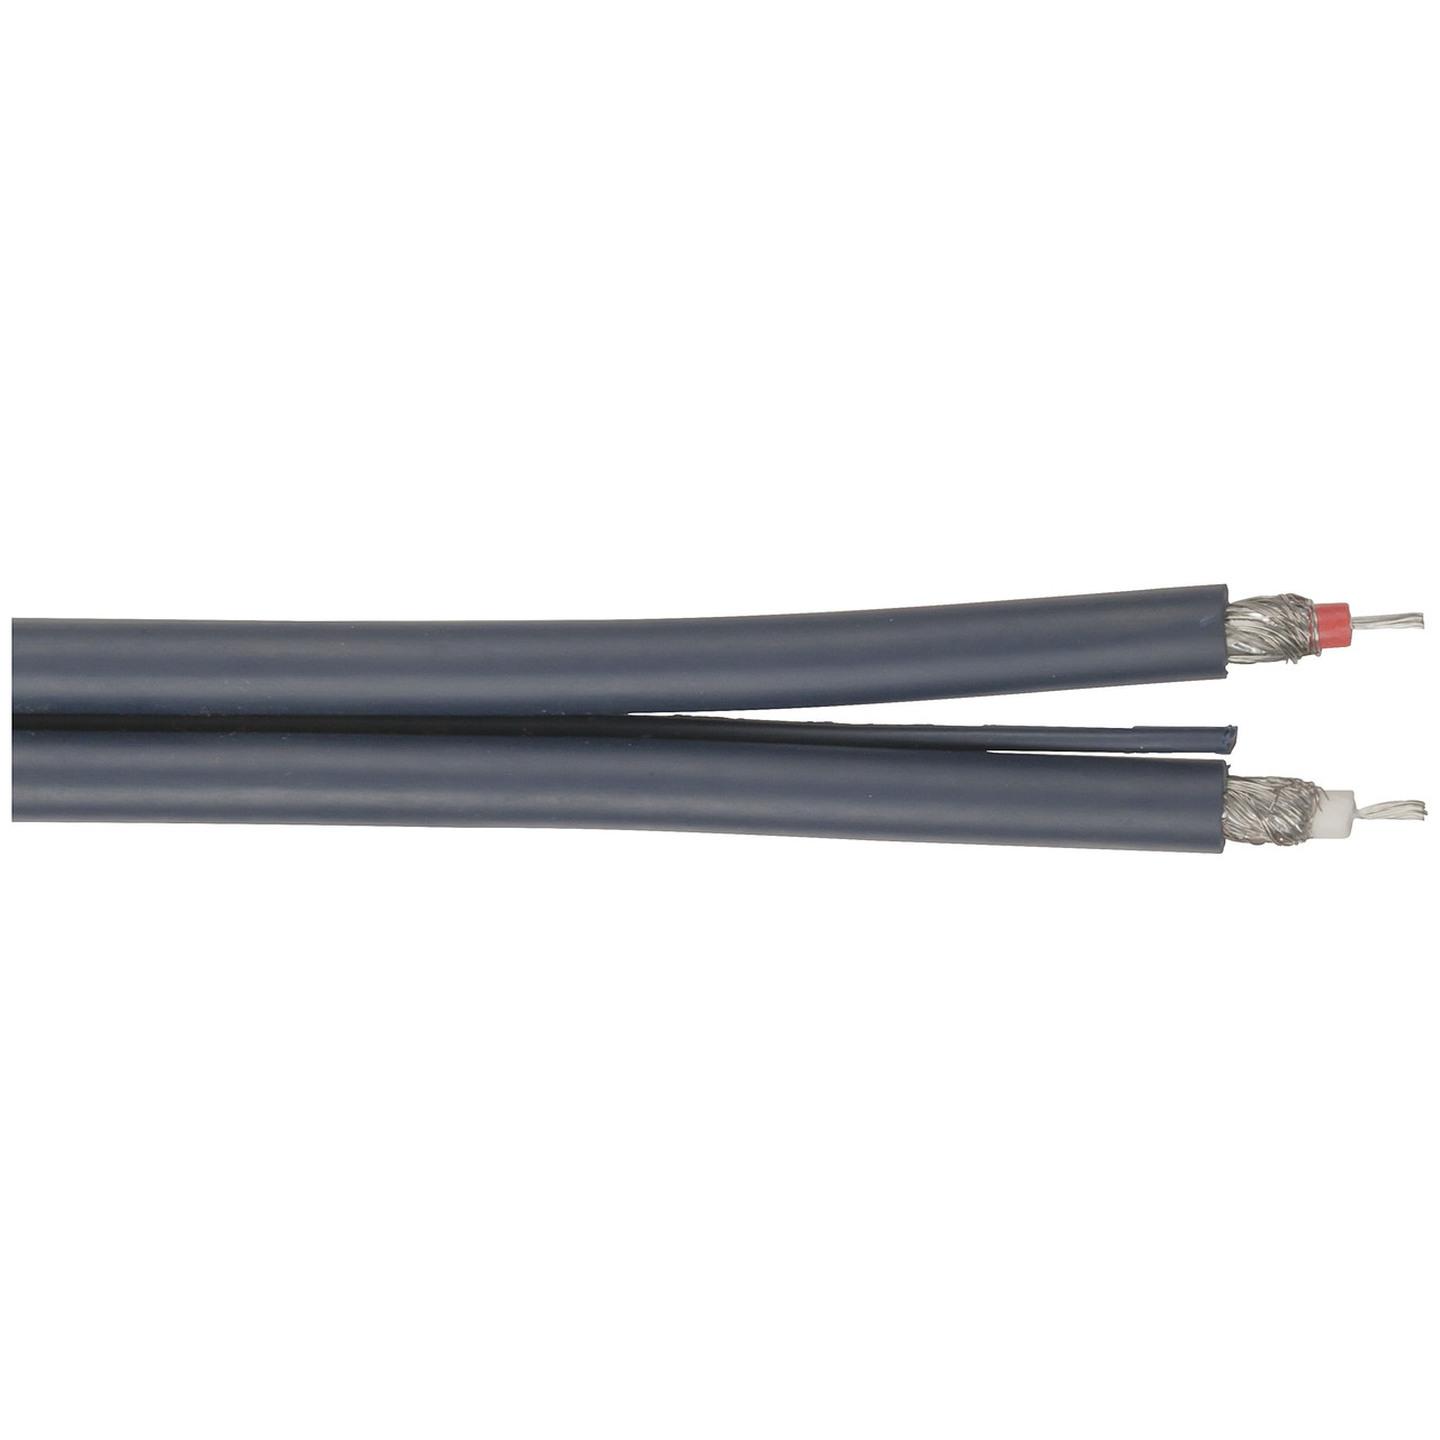 FIG 8 - OFC Shielded Audio Cable